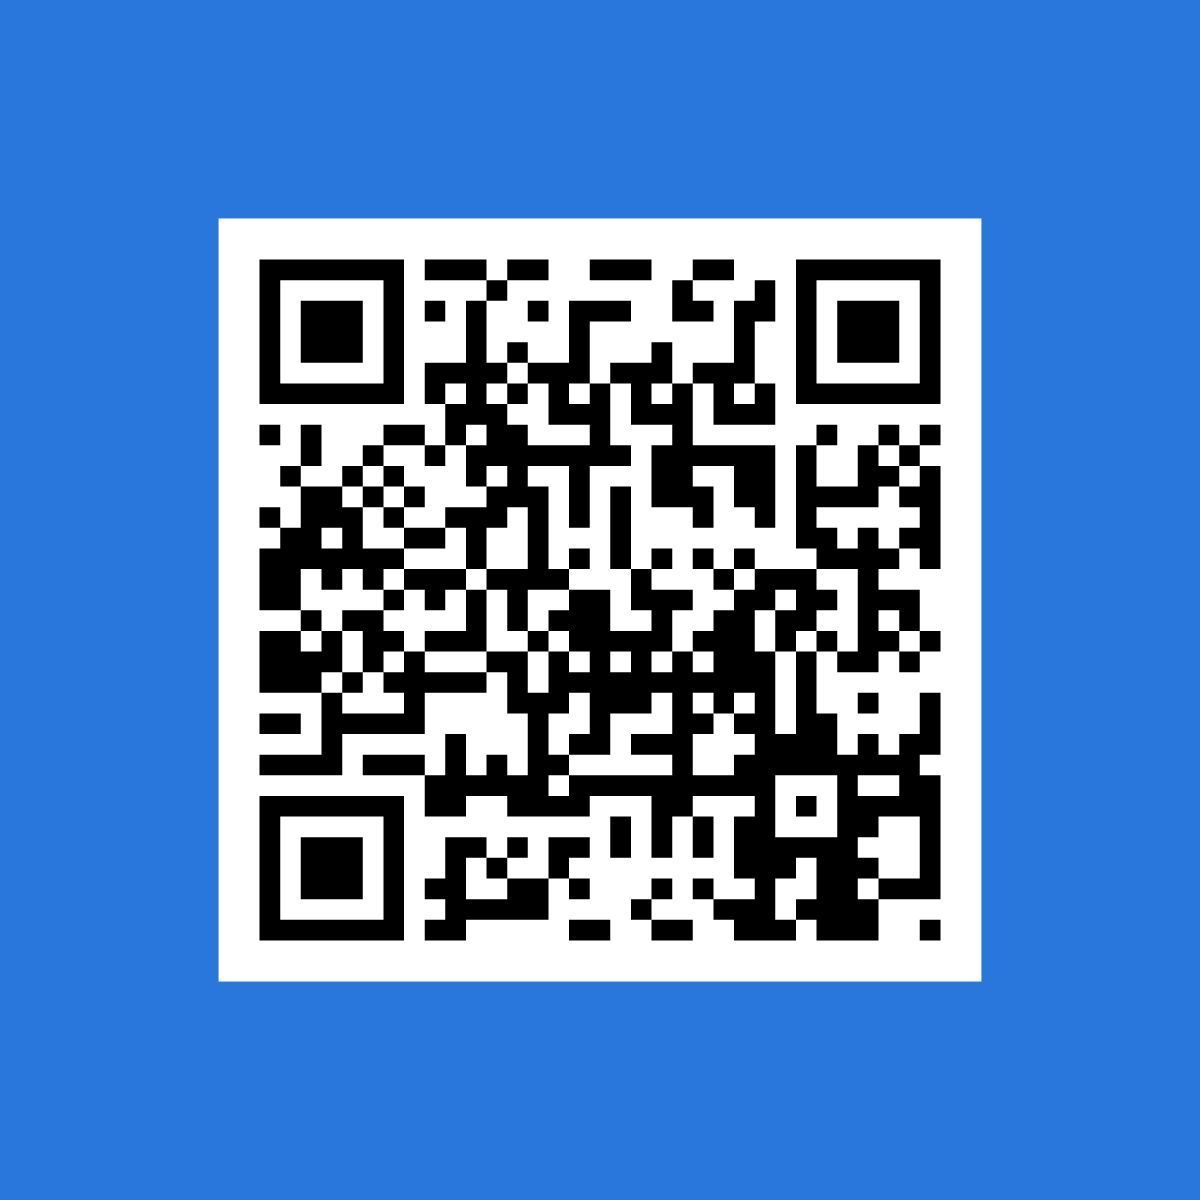 A black and white qr code on a blue background